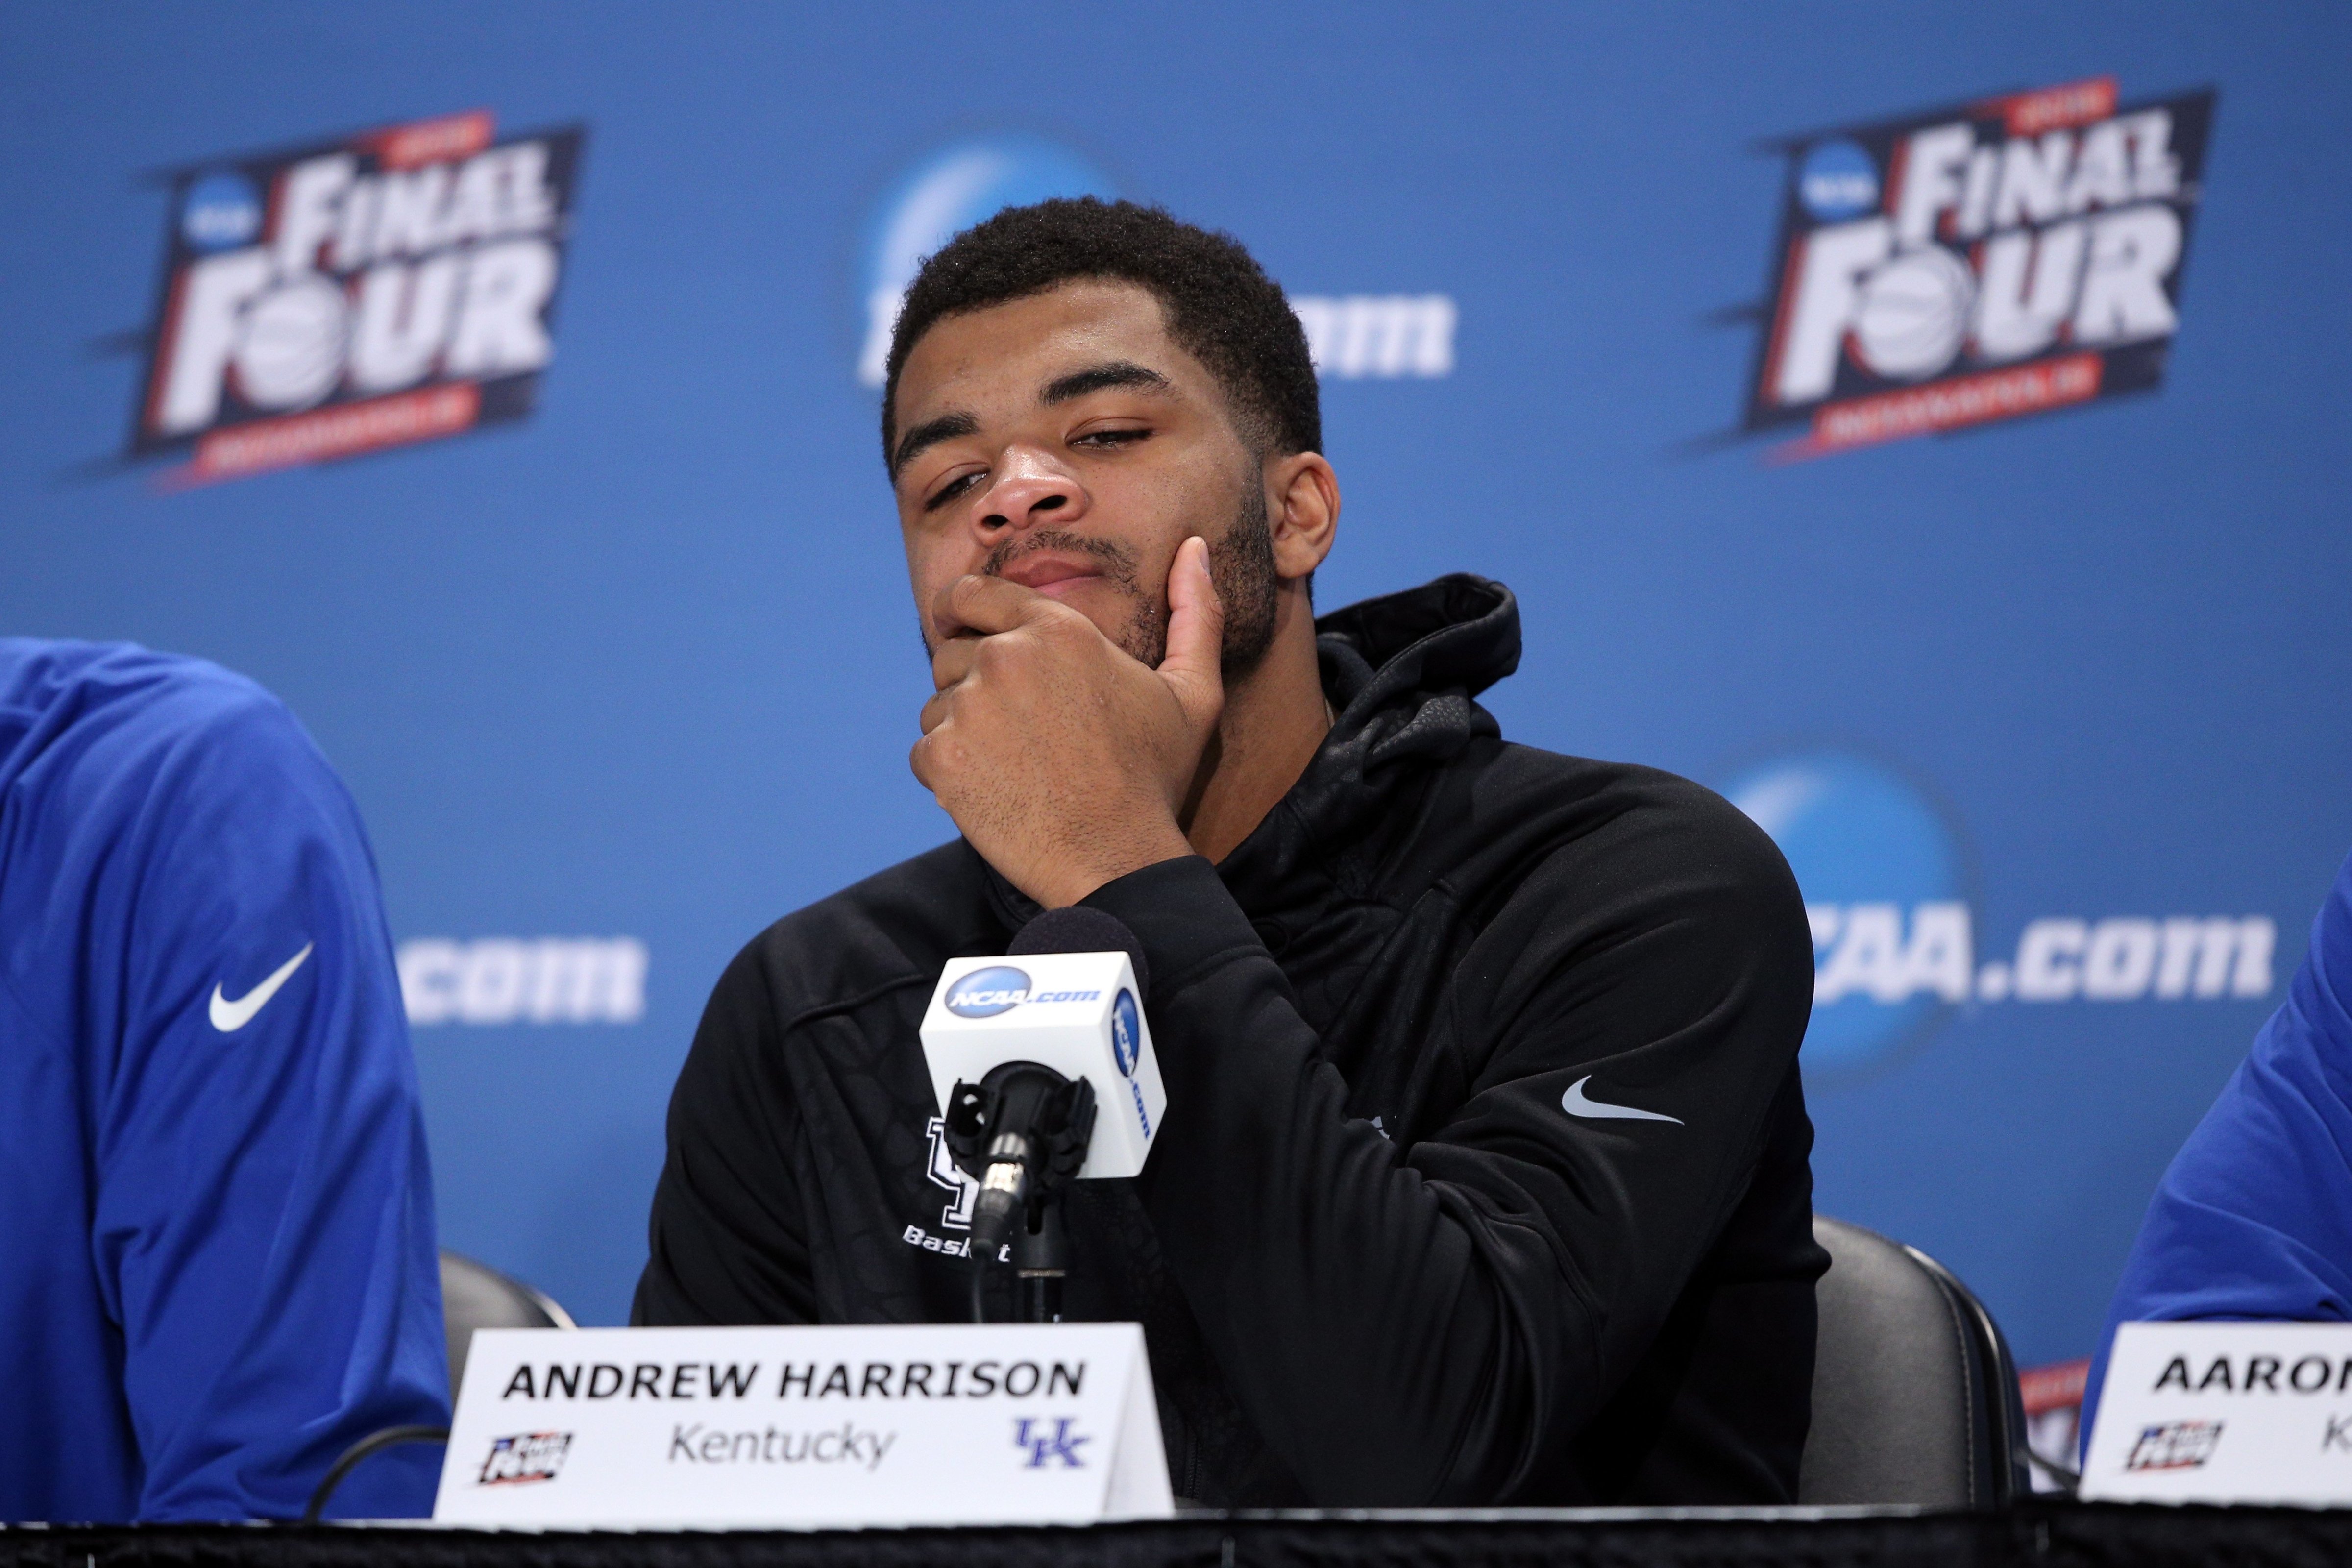 Andrew Harrison of the Kentucky Wildcats reacts in the post game press conference after being defeated by the Wisconsin Badgers during the NCAA Men's Final Four Semifinal at Lucas Oil Stadium on April 4, 2015 in Indianapolis.